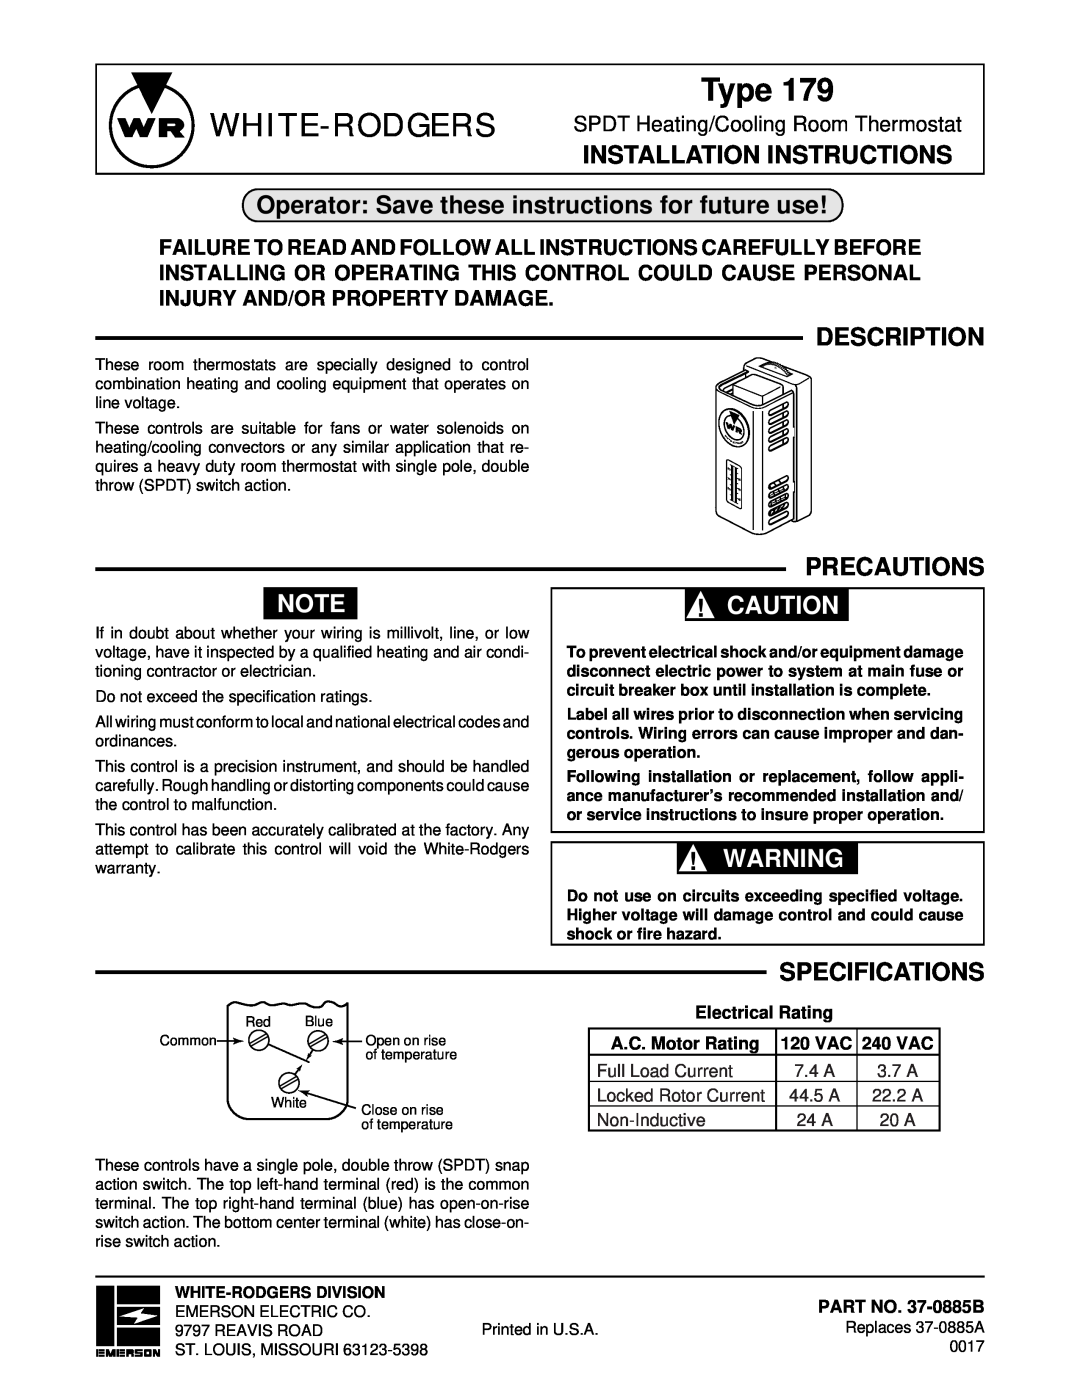 White Rodgers 179 specifications Installation Instructions, Operator Save these instructions for future use, Description 